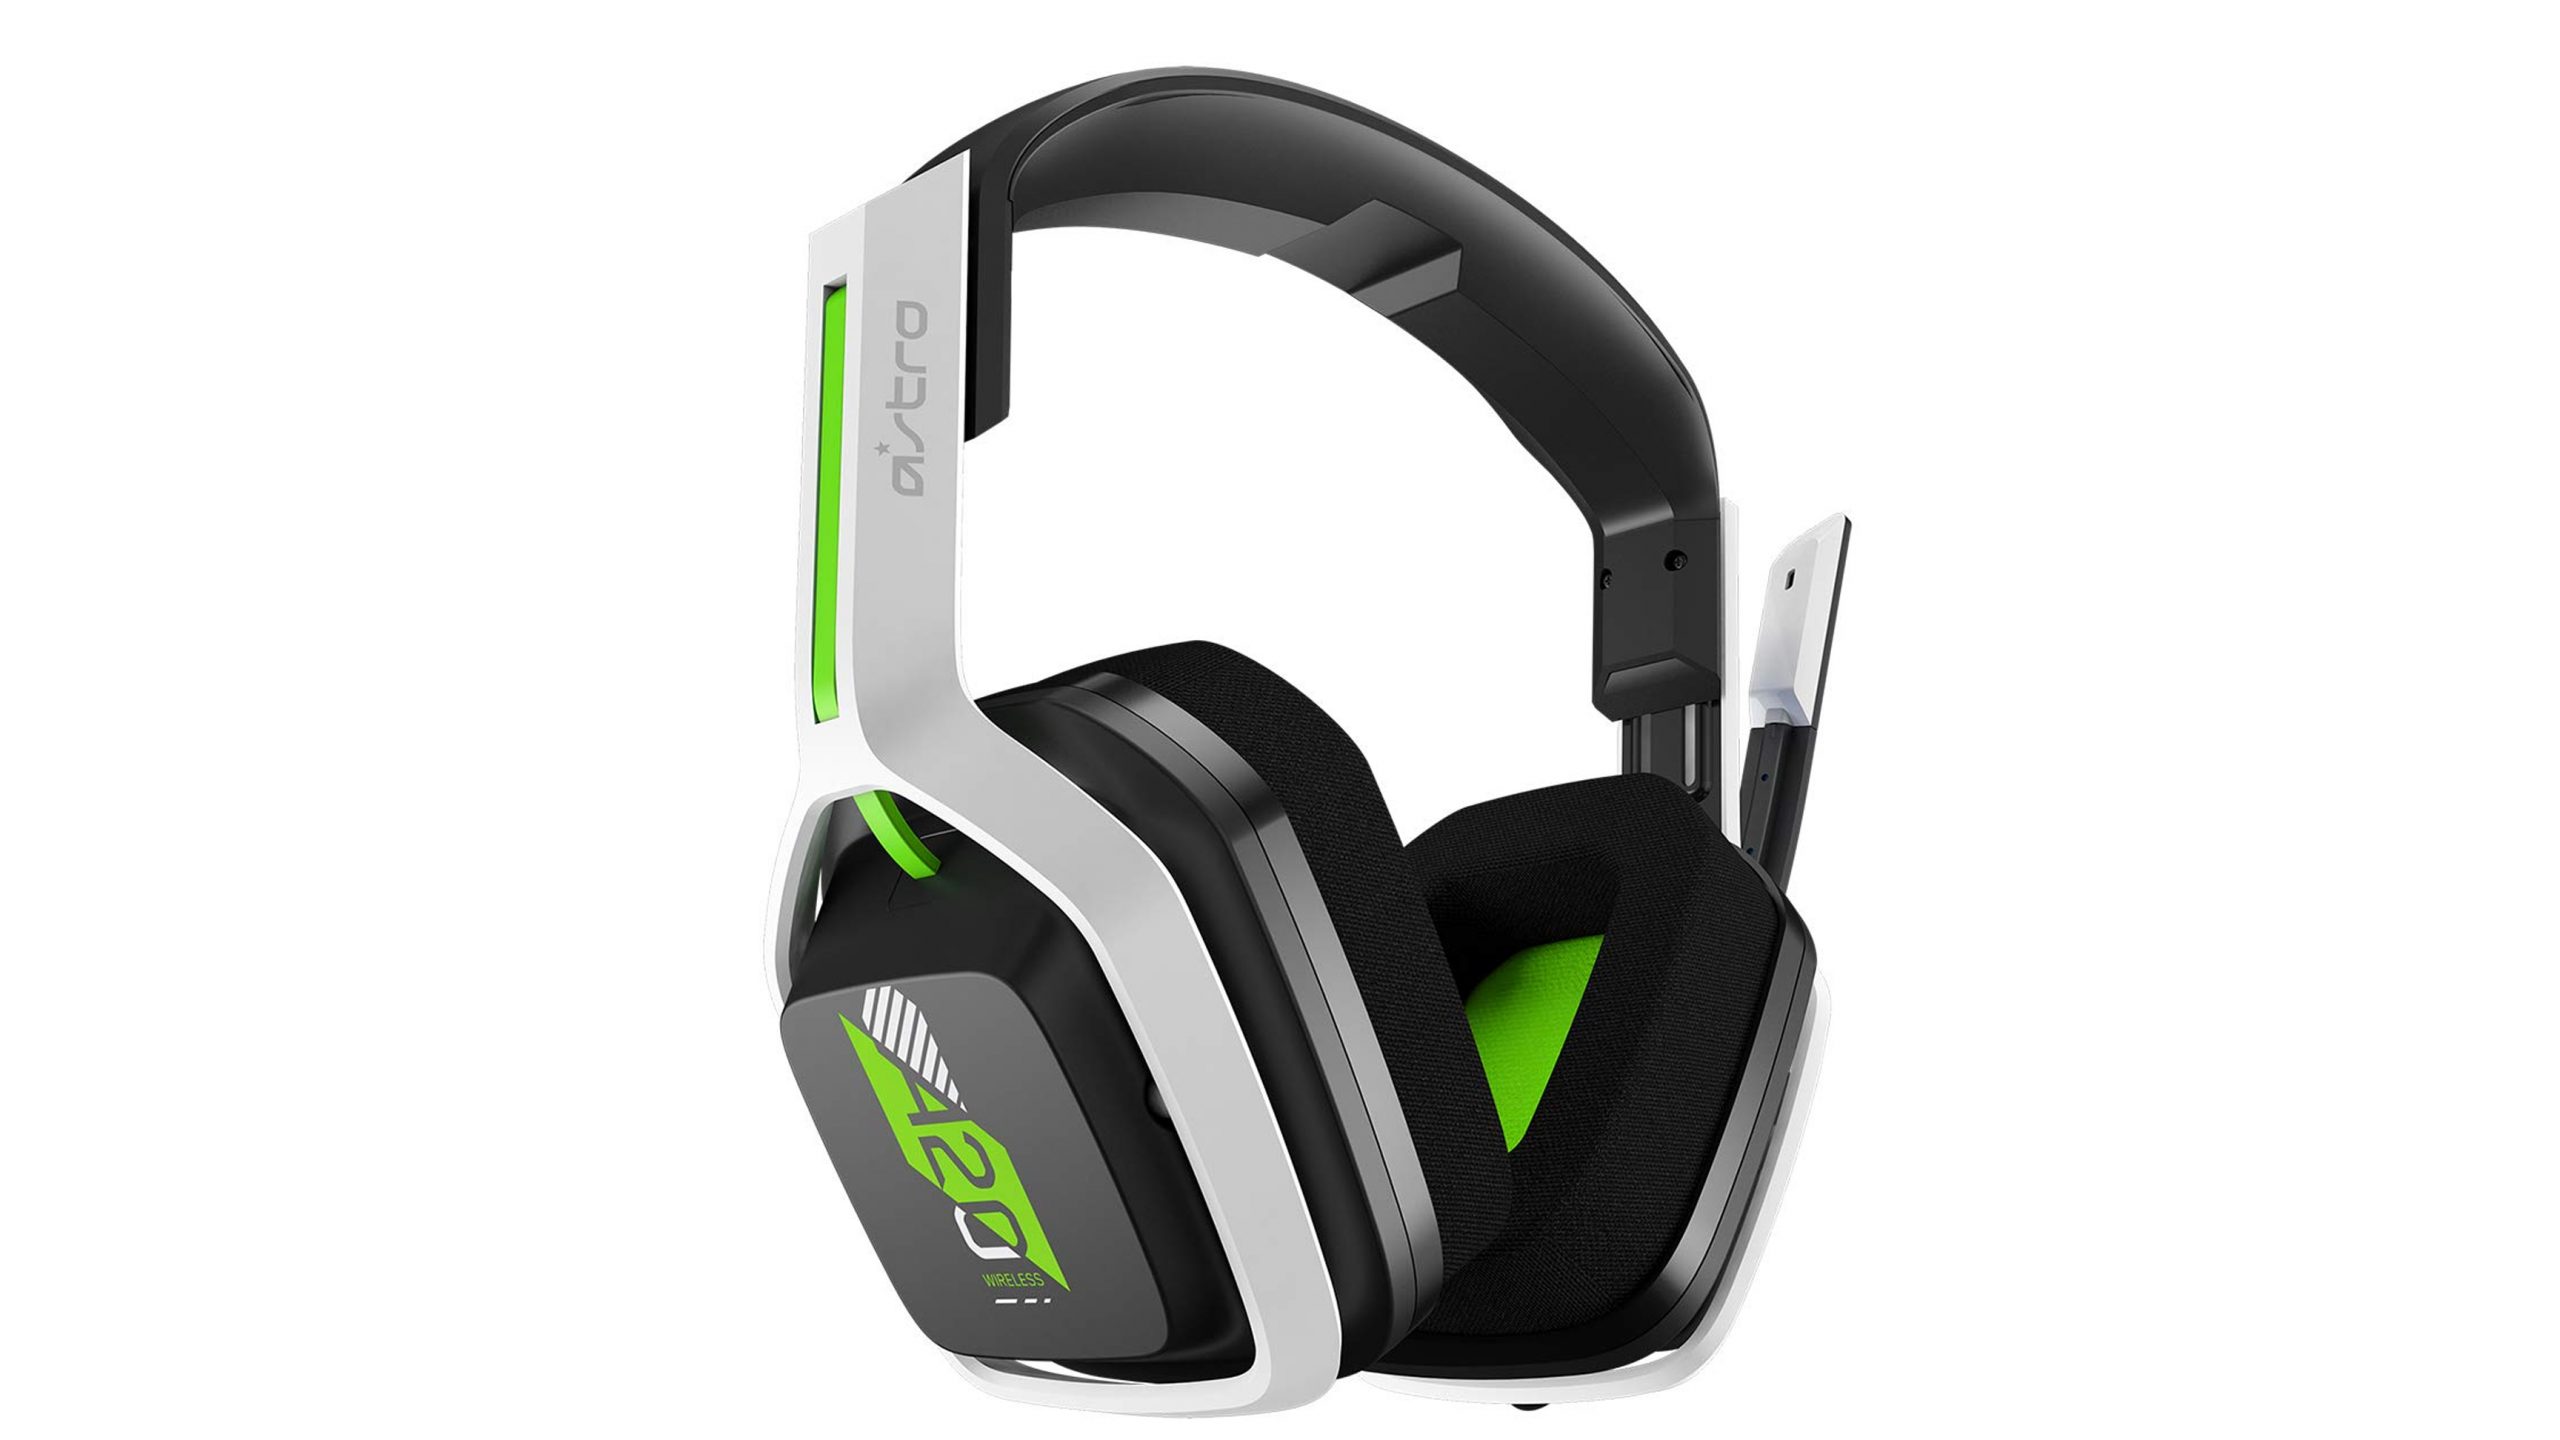 Best Wireless Gaming Headsets for Xbox